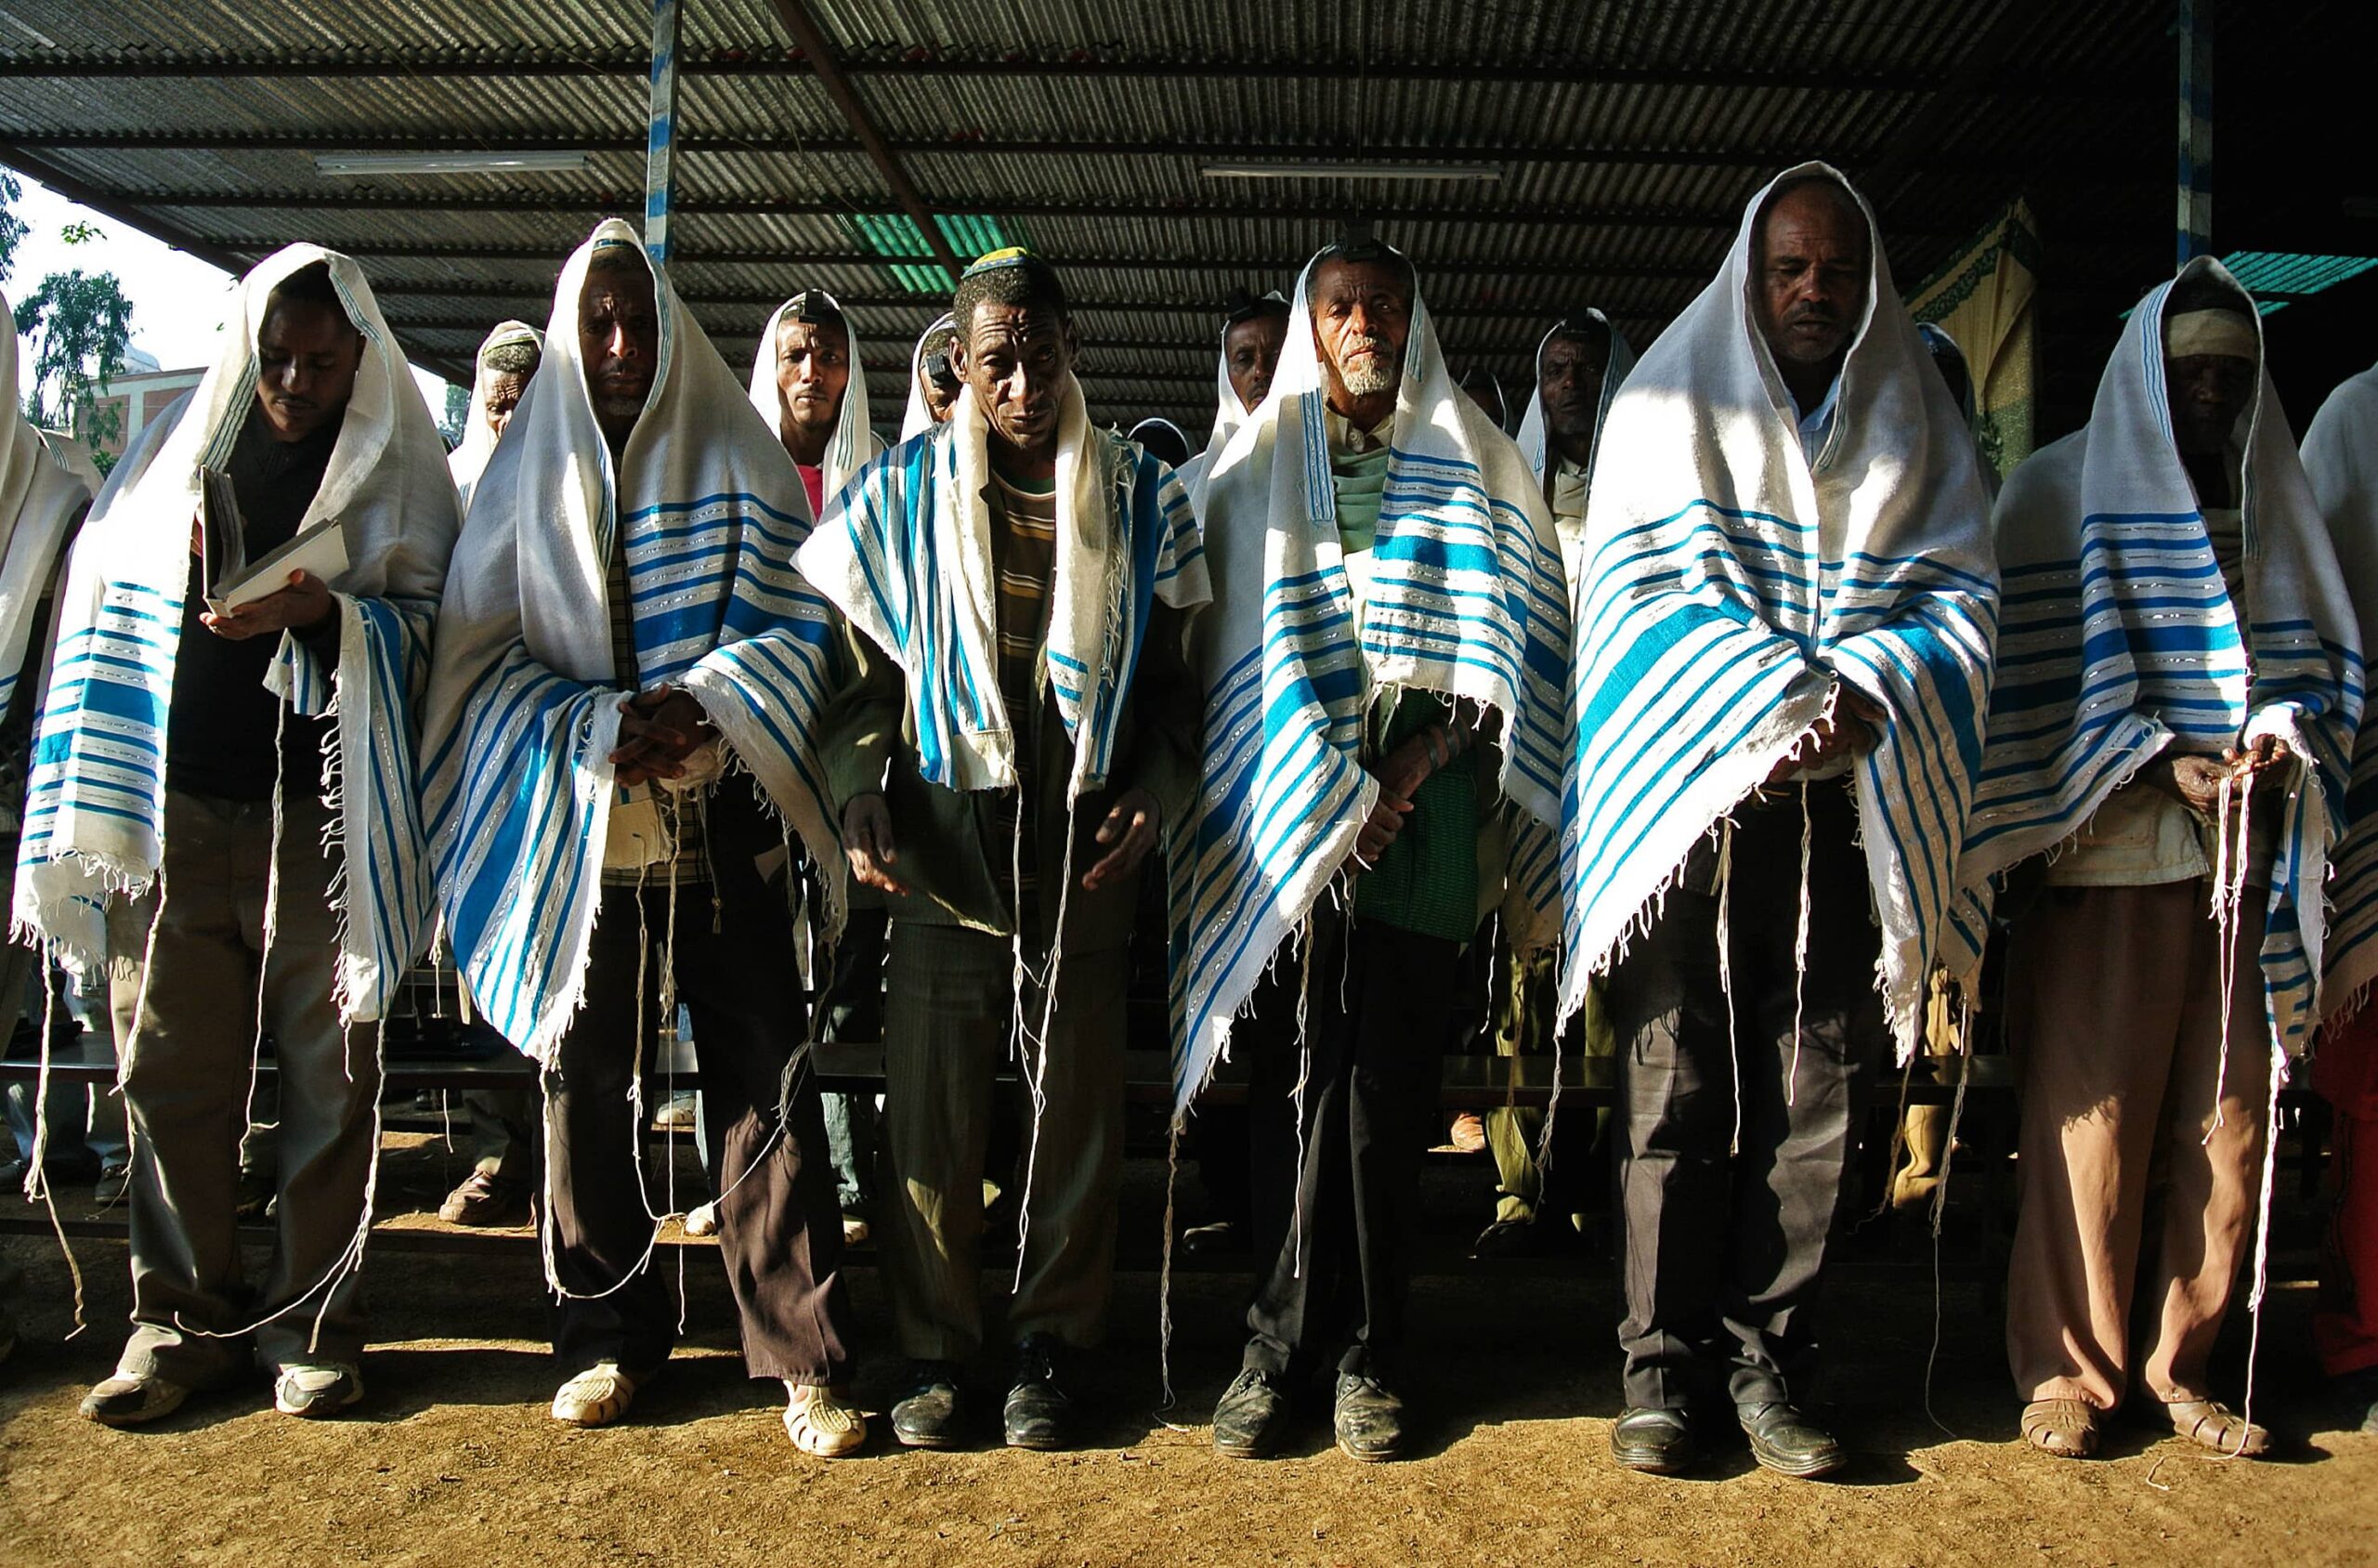 A gathering of men donning blue and white shawls, showcasing a sense of unity and cultural attire.